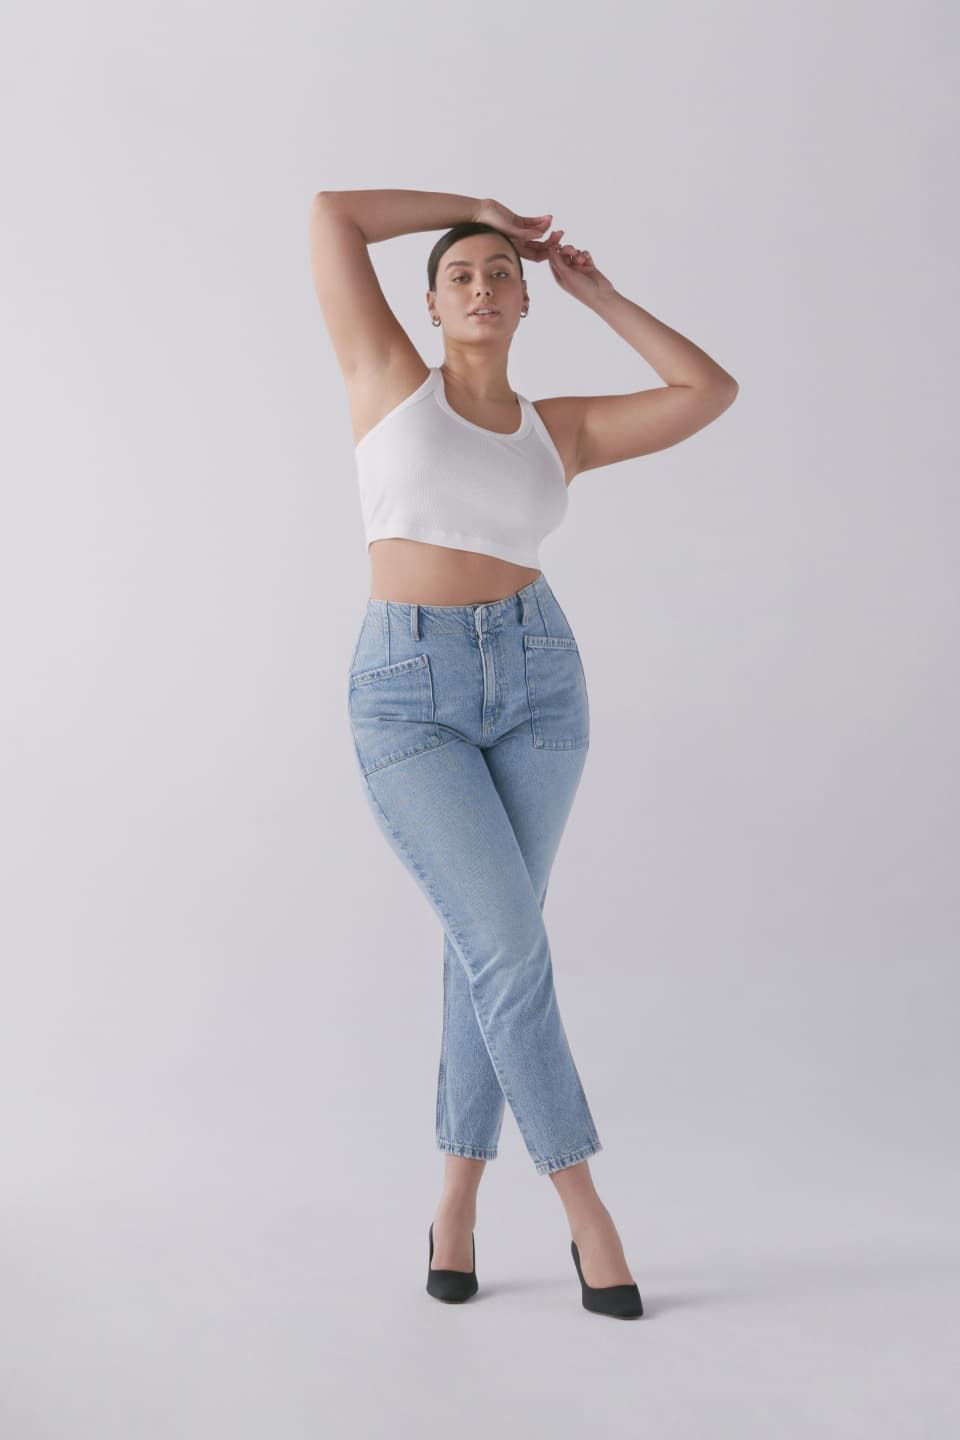 A model wears a white racer tank and blue mom jeans.